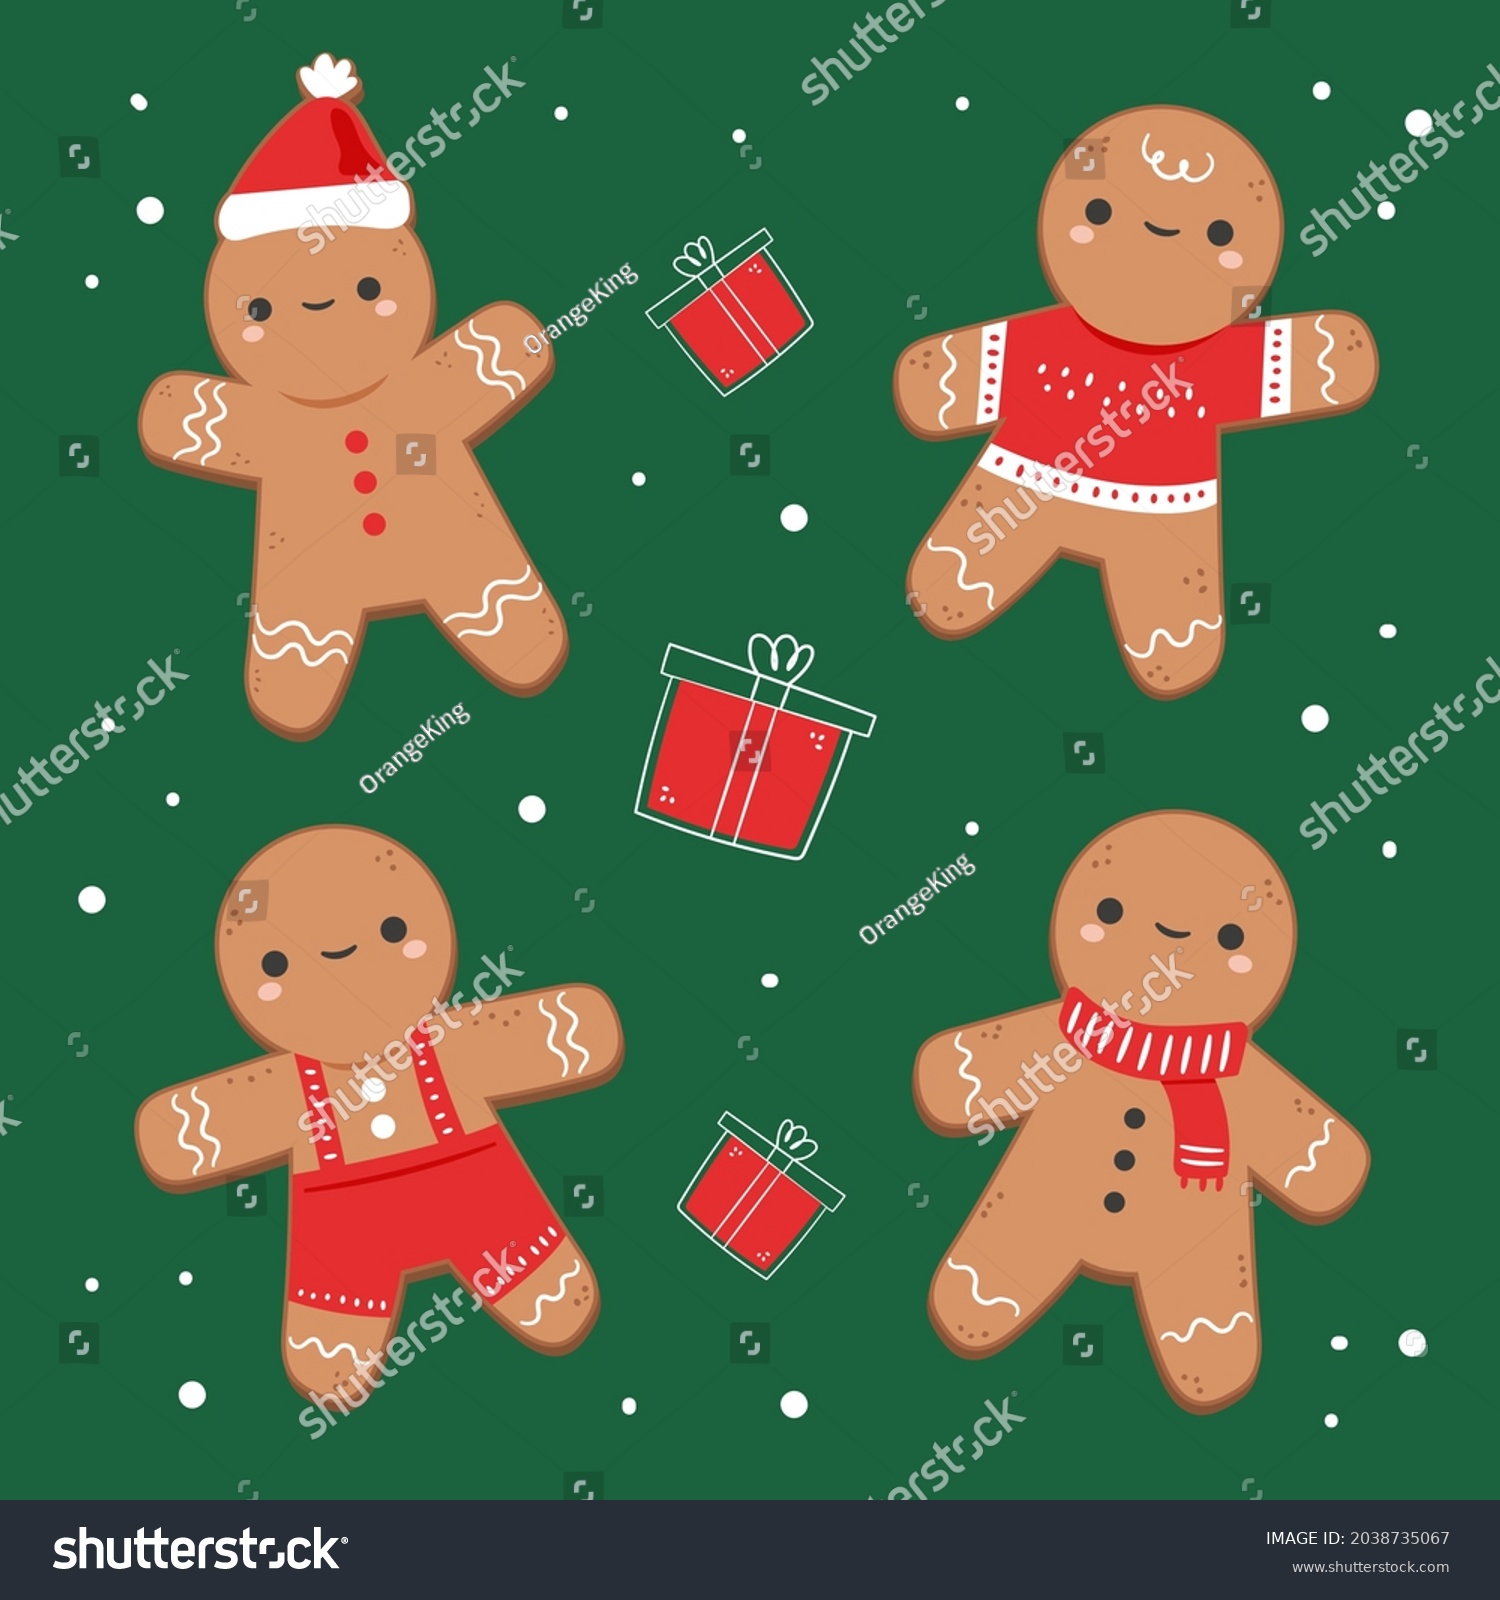 Gingerbread man collection. Christmas icon. Holiday winter symbols. Festive treats. New year cookies, sweets. Vector illustration. #2038735067